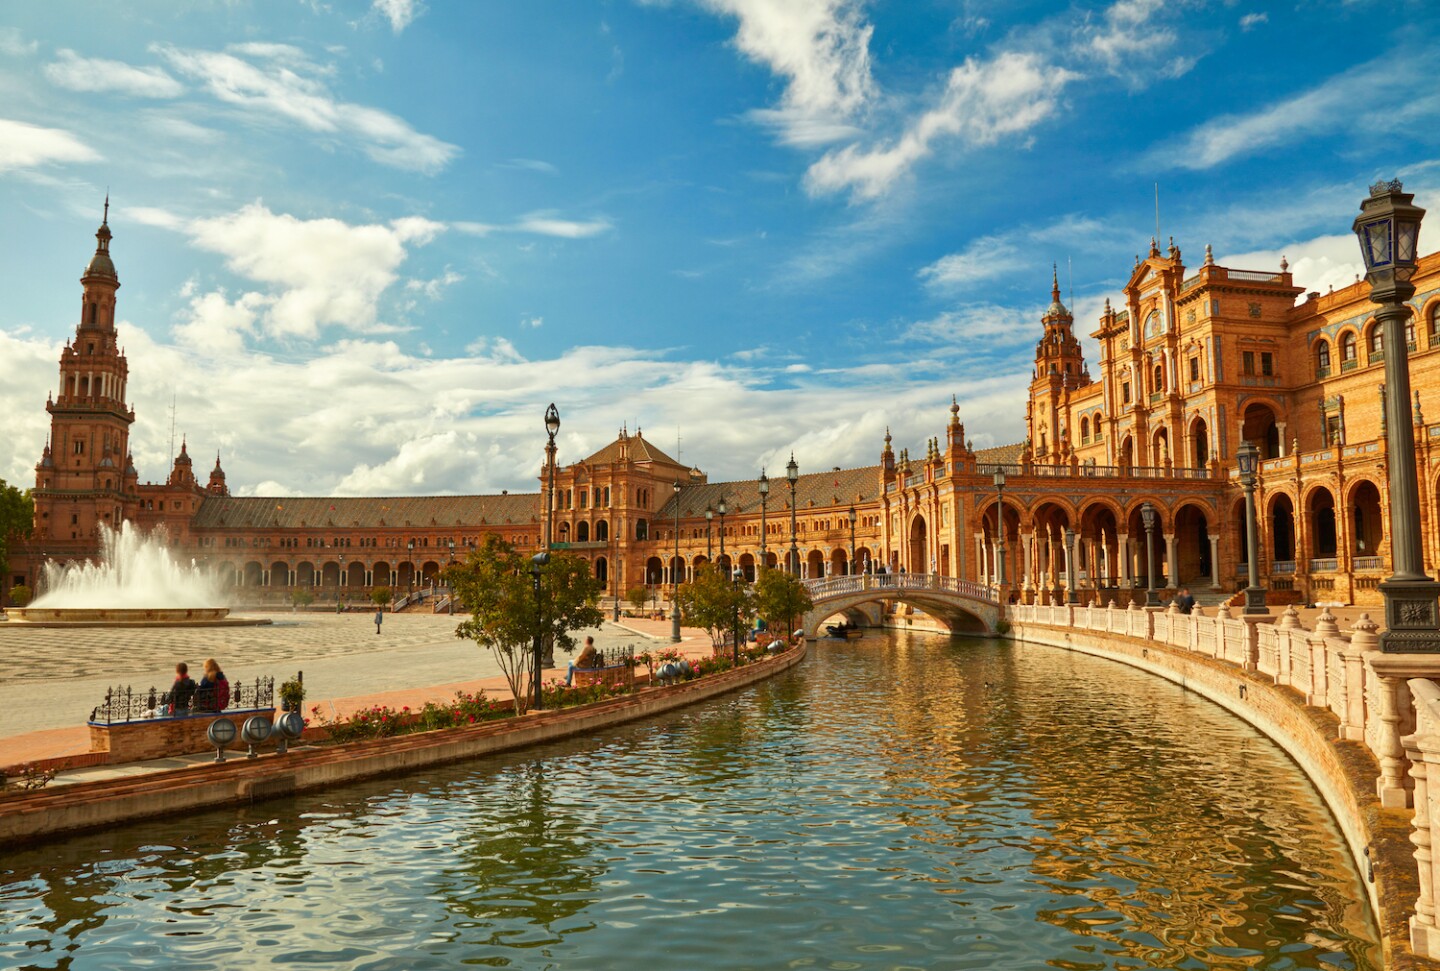 <h2>4. Seville</h2> <p><i>Andalusia</i></p> <p>Warm people, sunny days spent sipping sangria, and trees full of oranges—that relaxed, siesta-loving attitude of Spain is available in Seville. The capital of Spain’s Andalusia autonomous community still bears plenty of marks from its past under the Moors. One of the most beautiful places to explore its history is the Royal Alcázar of Seville, an 11th-century palace sporting walled gardens and geometric, patterned arches that have been <a class="Link" href="https://www.afar.com/magazine/game-of-thrones-destinations-you-can-visit-in-real-life" rel="noopener">featured in <i>Game of Thrones</i></a> and <i>Lawrence of Arabia</i>. Stop and smell the jasmine at Plaza de España, and walk along the curving wall featuring 52 colorful mosaics that depict all of Spain’s provinces.</p>